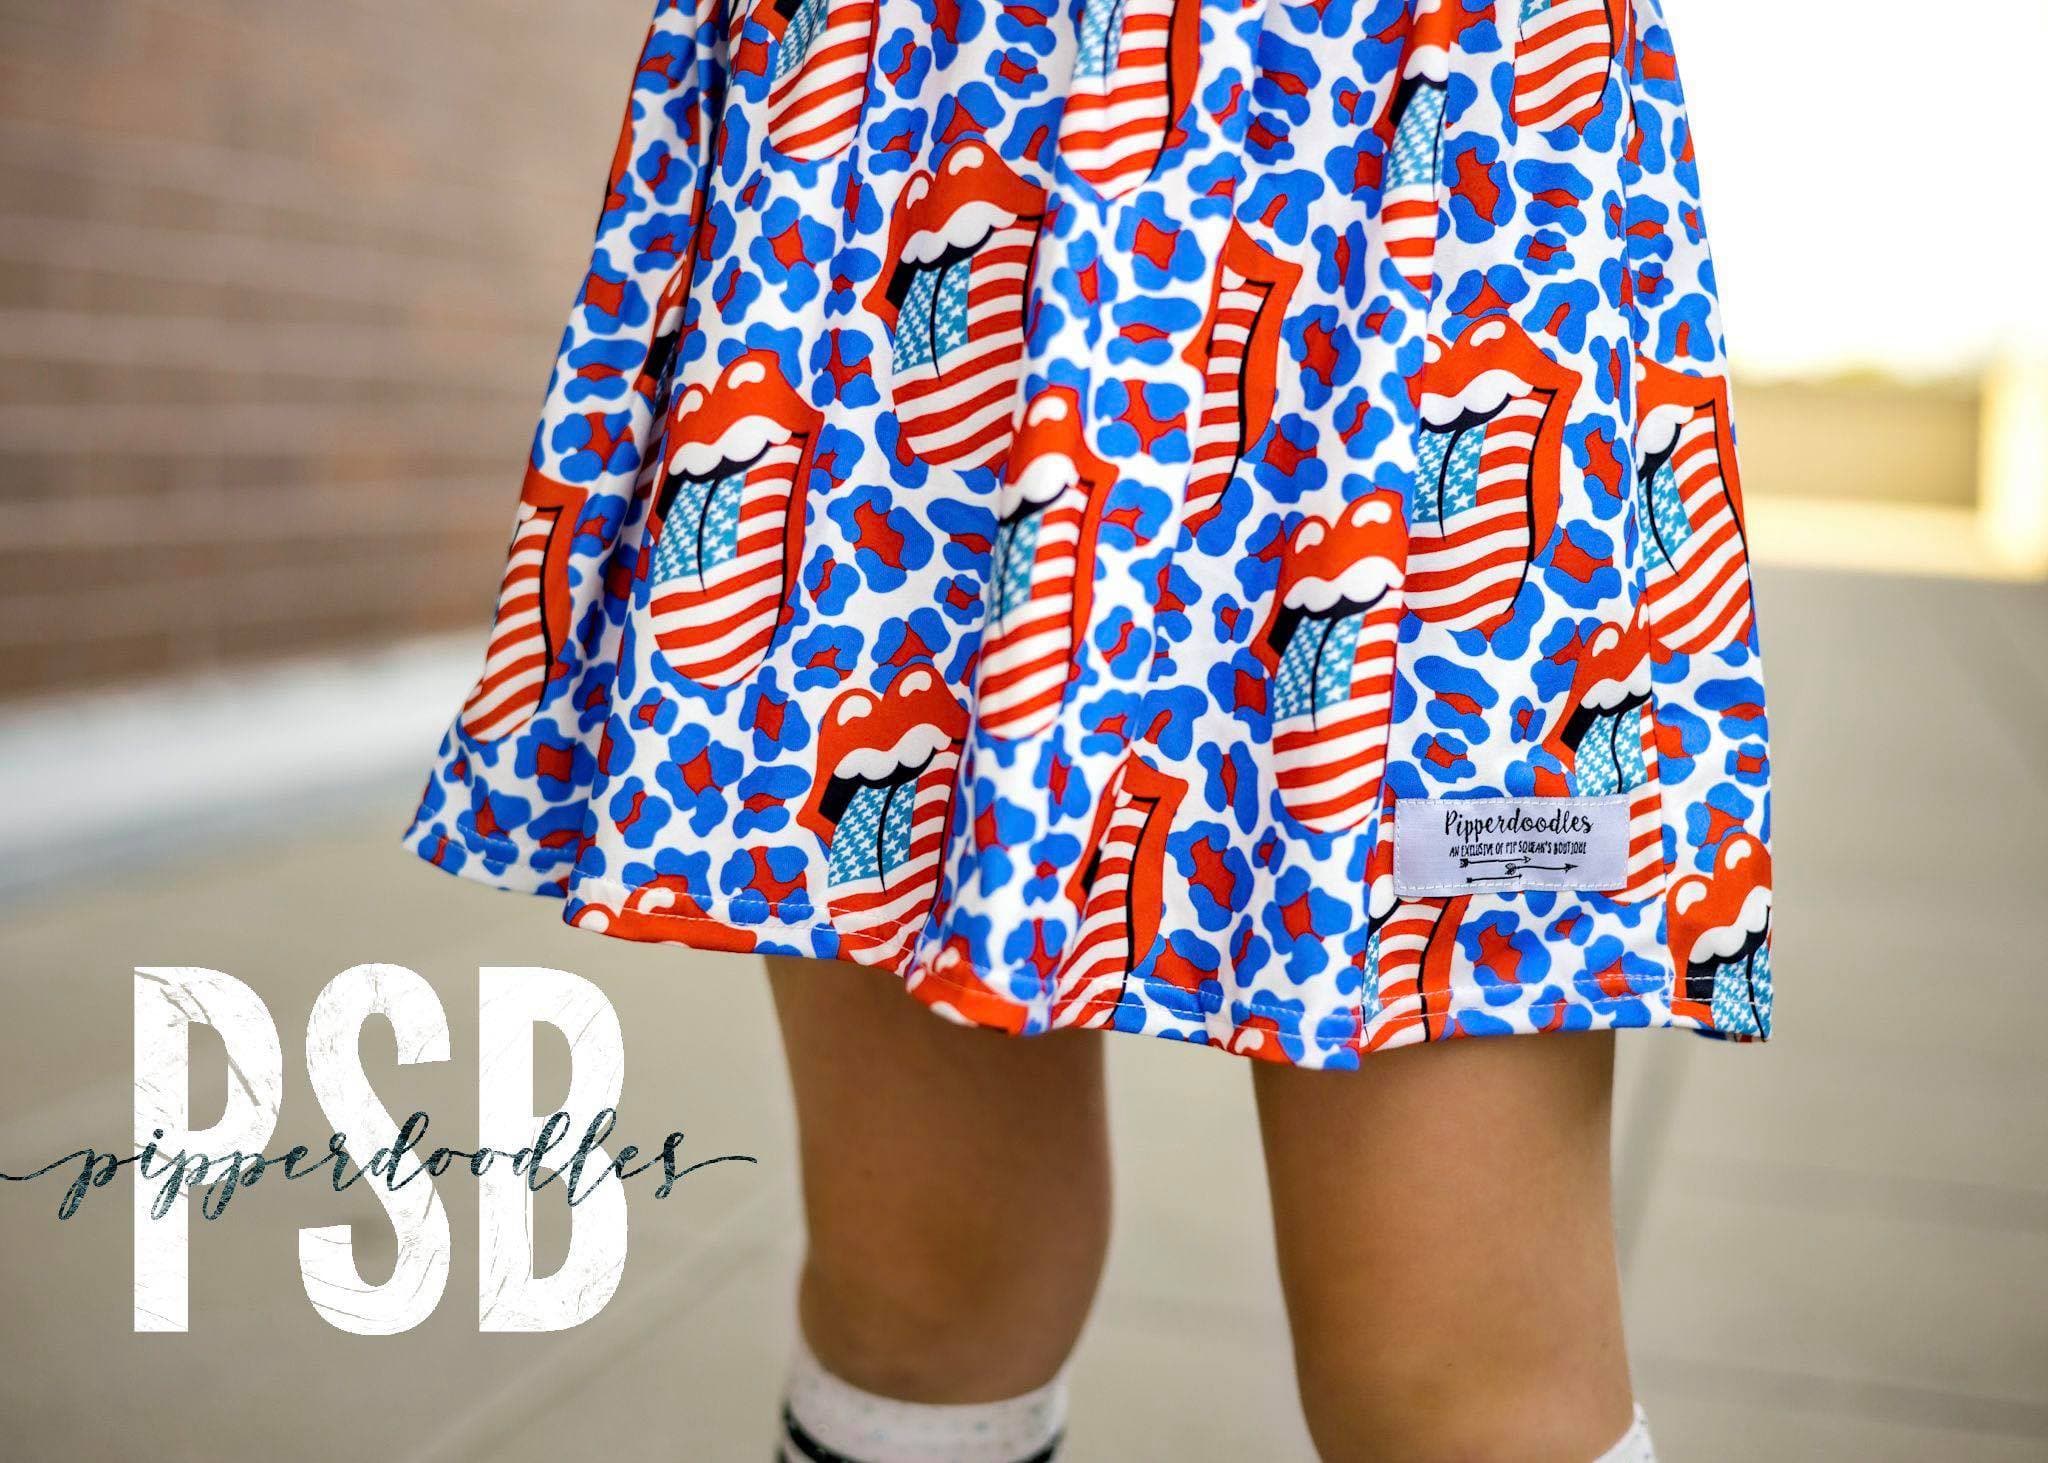 [It's a Party in the U.S.A.] Dress